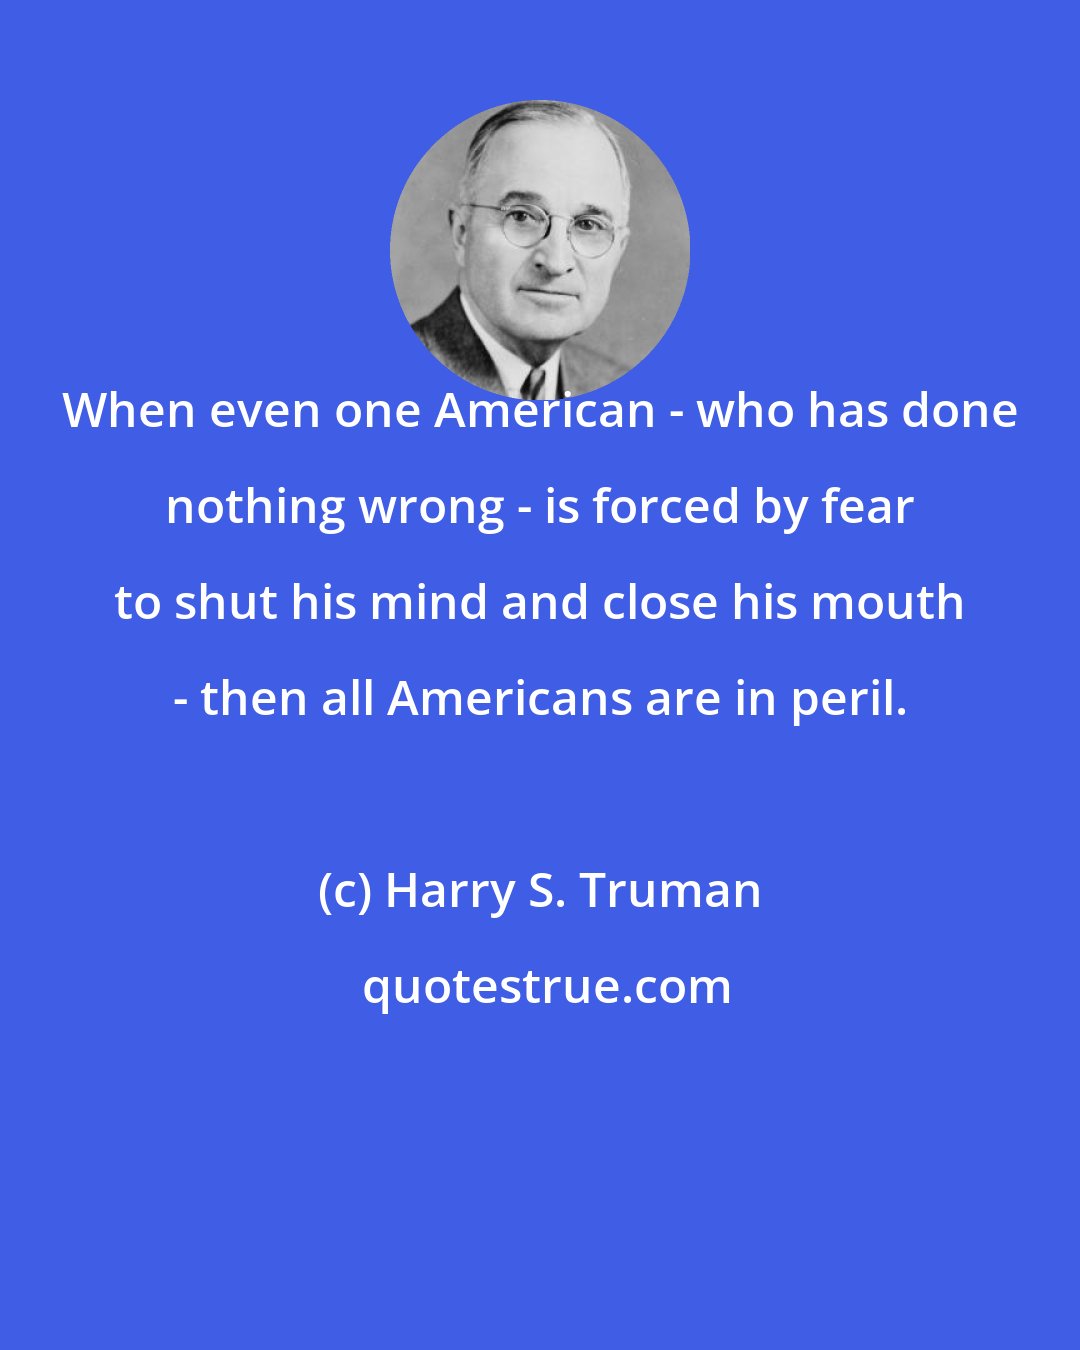 Harry S. Truman: When even one American - who has done nothing wrong - is forced by fear to shut his mind and close his mouth - then all Americans are in peril.